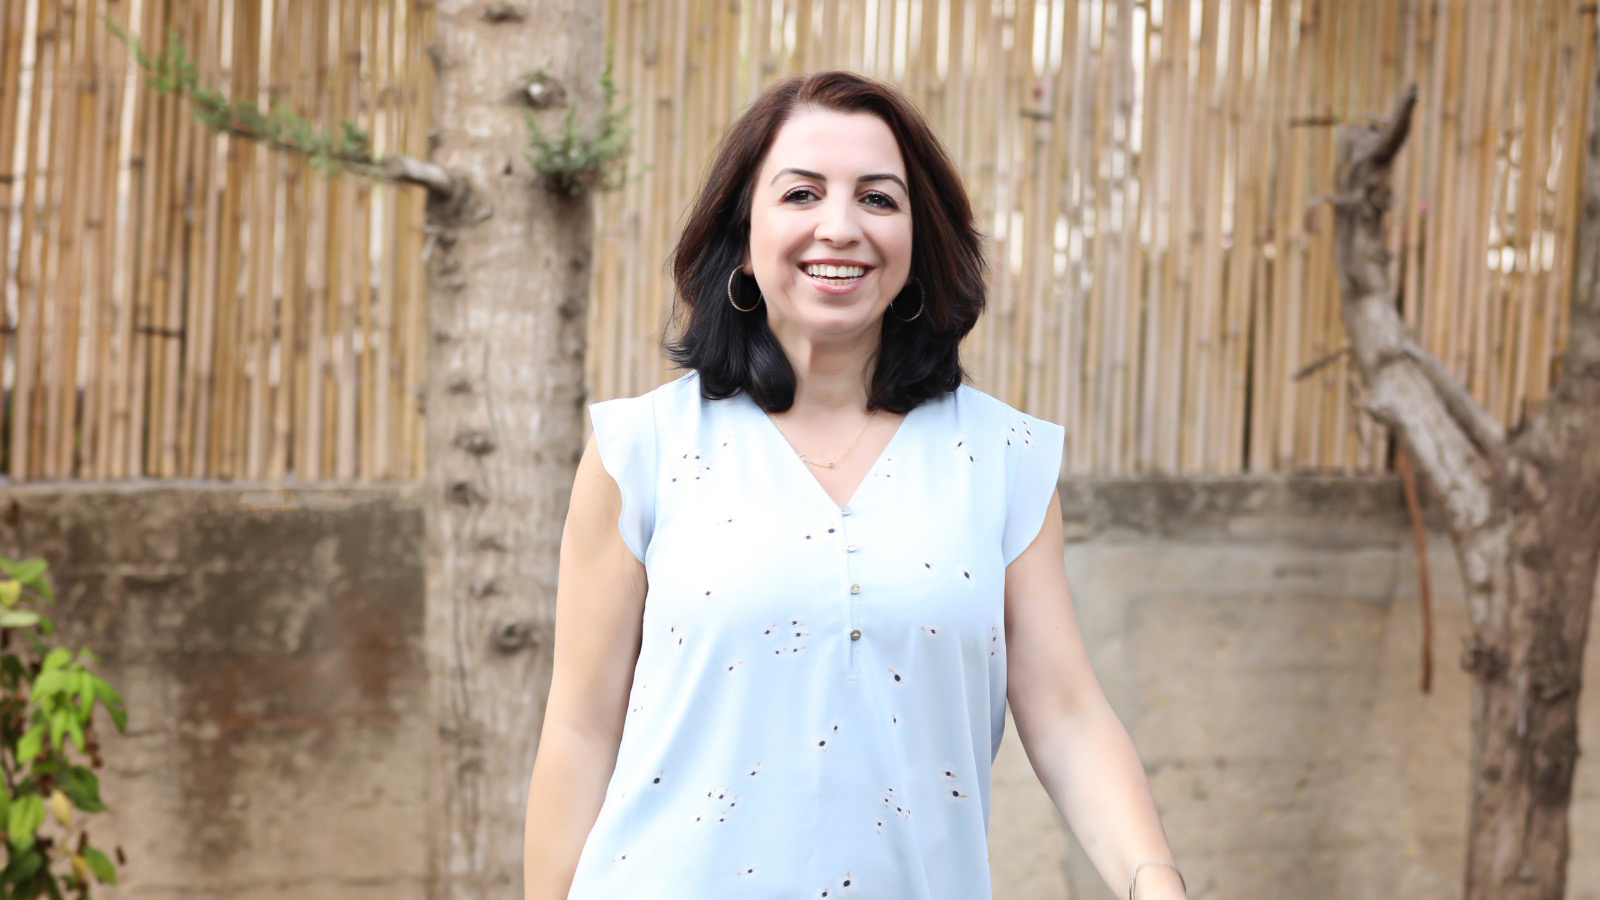 After graduating from Mason, Fakhira Halloun returned to Jerusalem, where she works as a civil society and peacebuilding consultant at the Office of the United Nations Special Coordinator for the Middle East Peace Process. Photo provided.